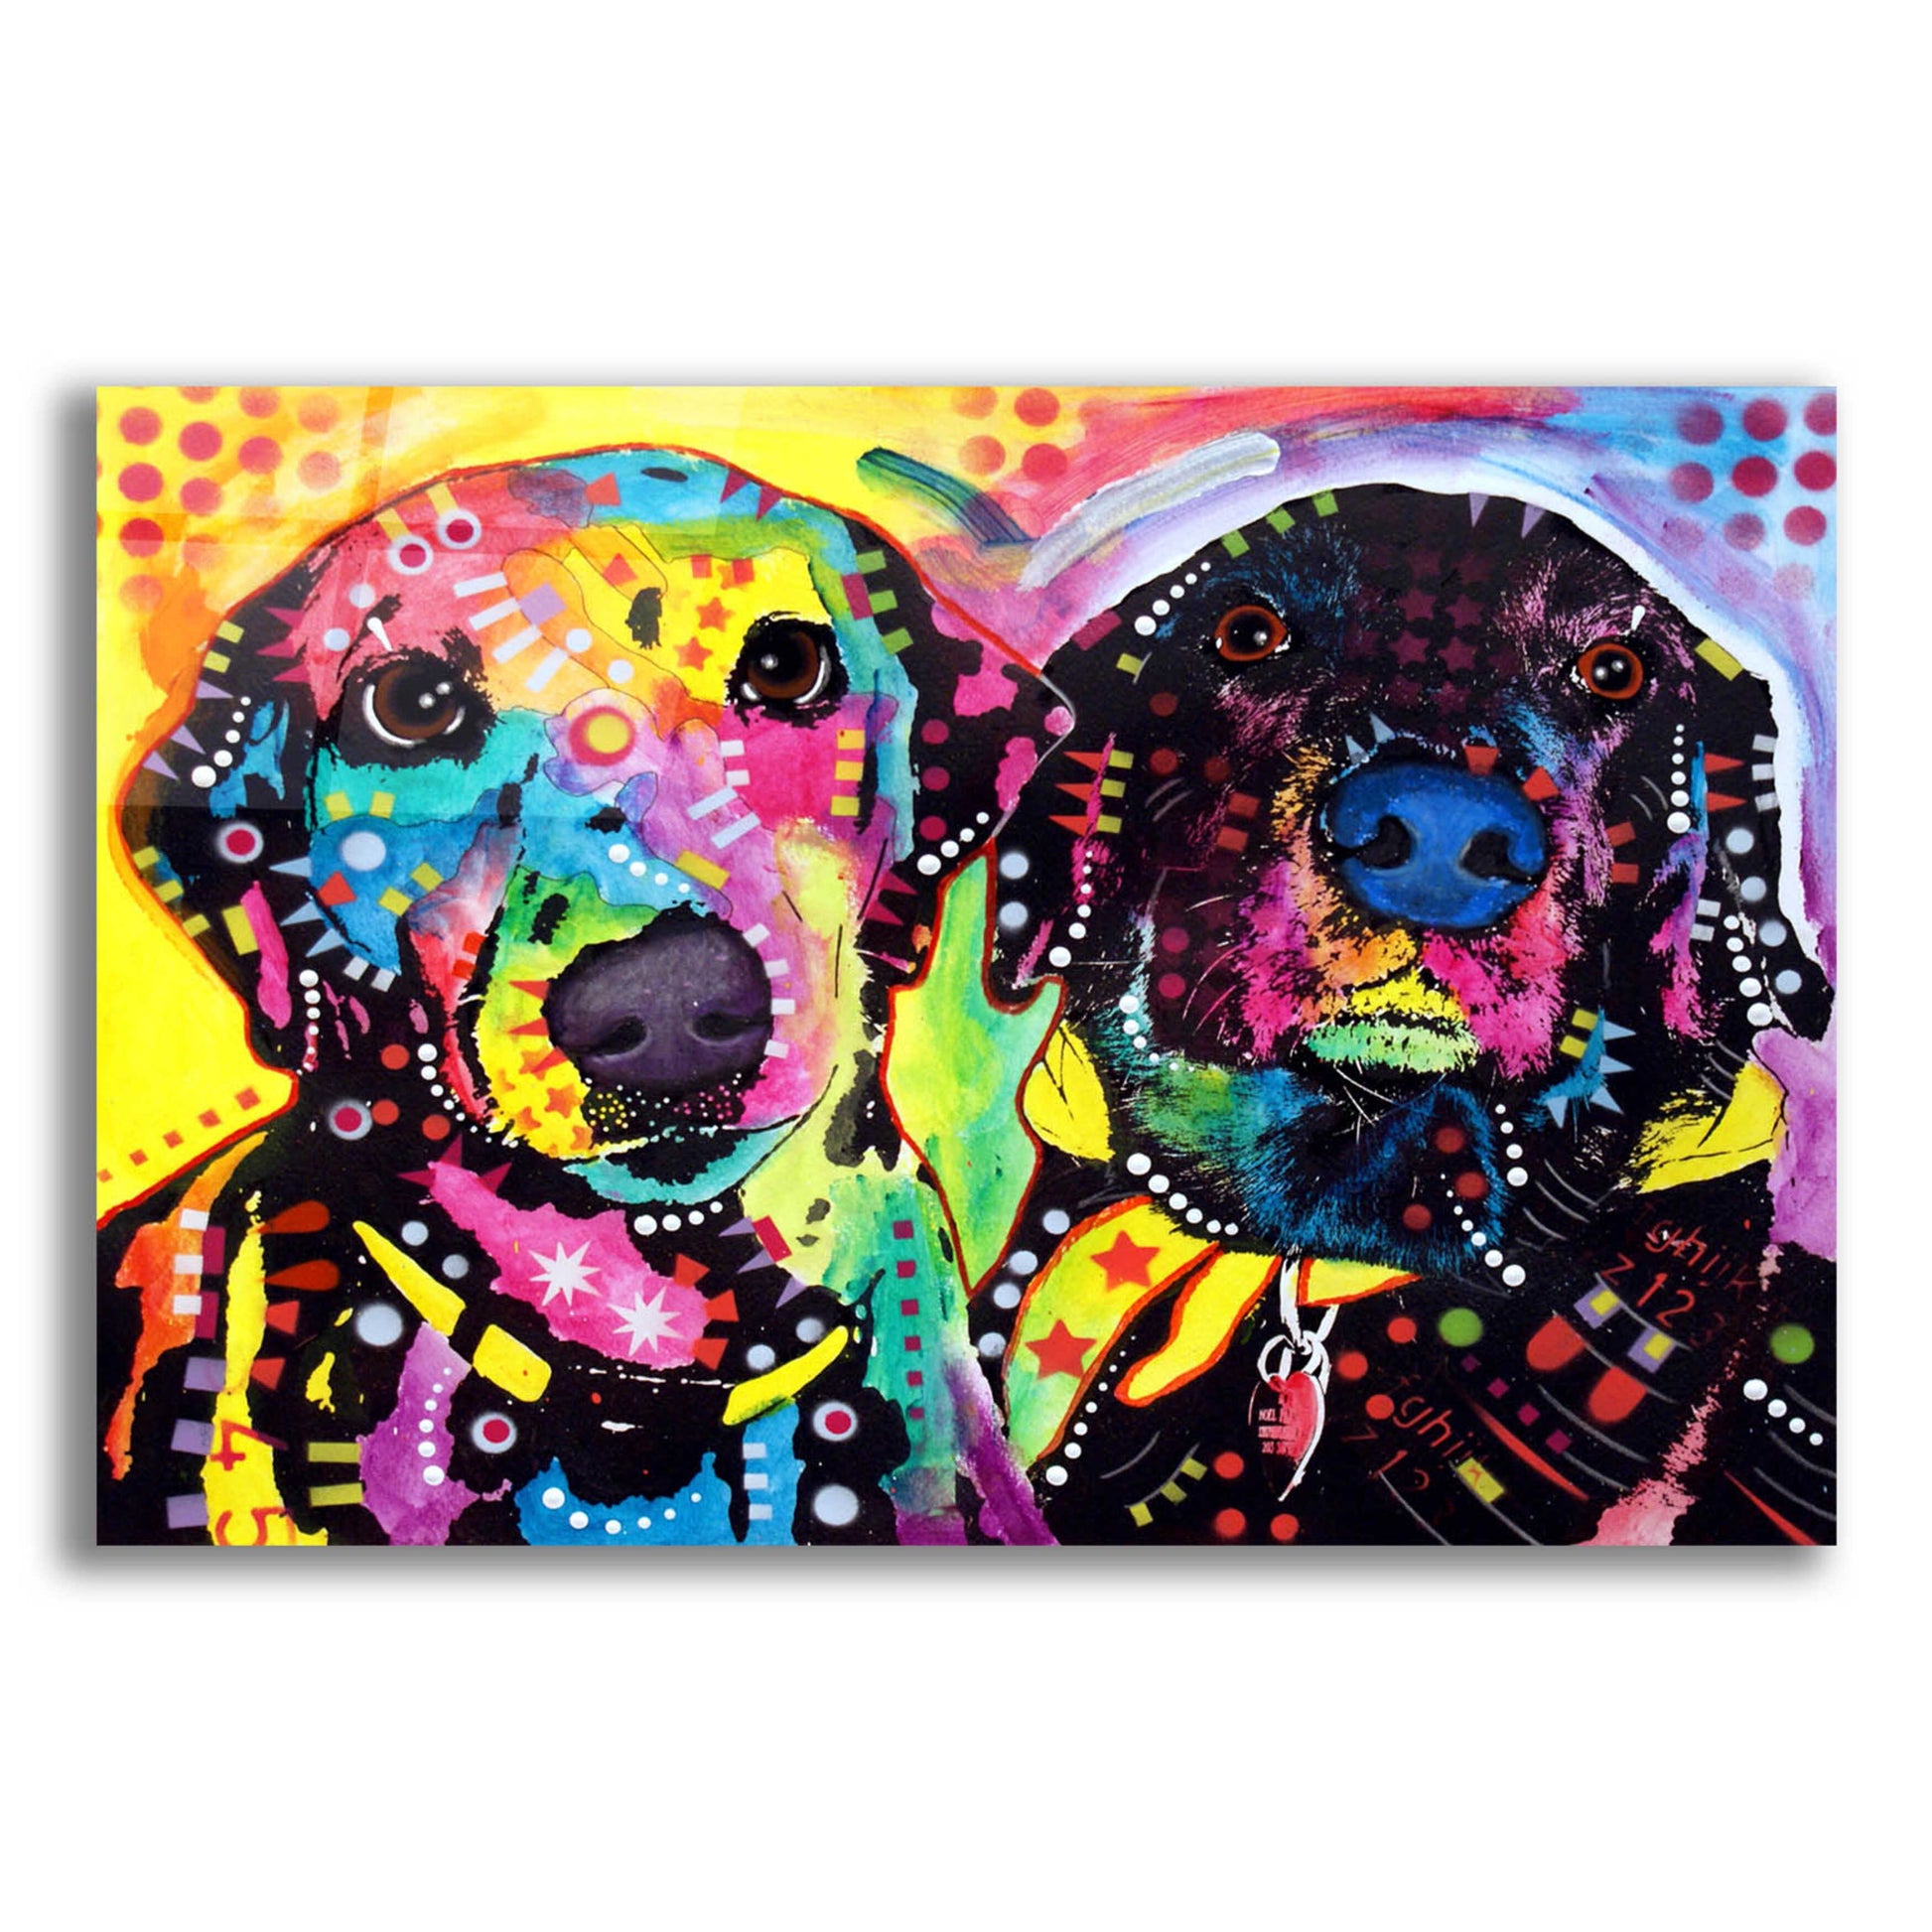 Epic Art 'Daisy and Noel' by Dean Russo, Acrylic Glass Wall Art